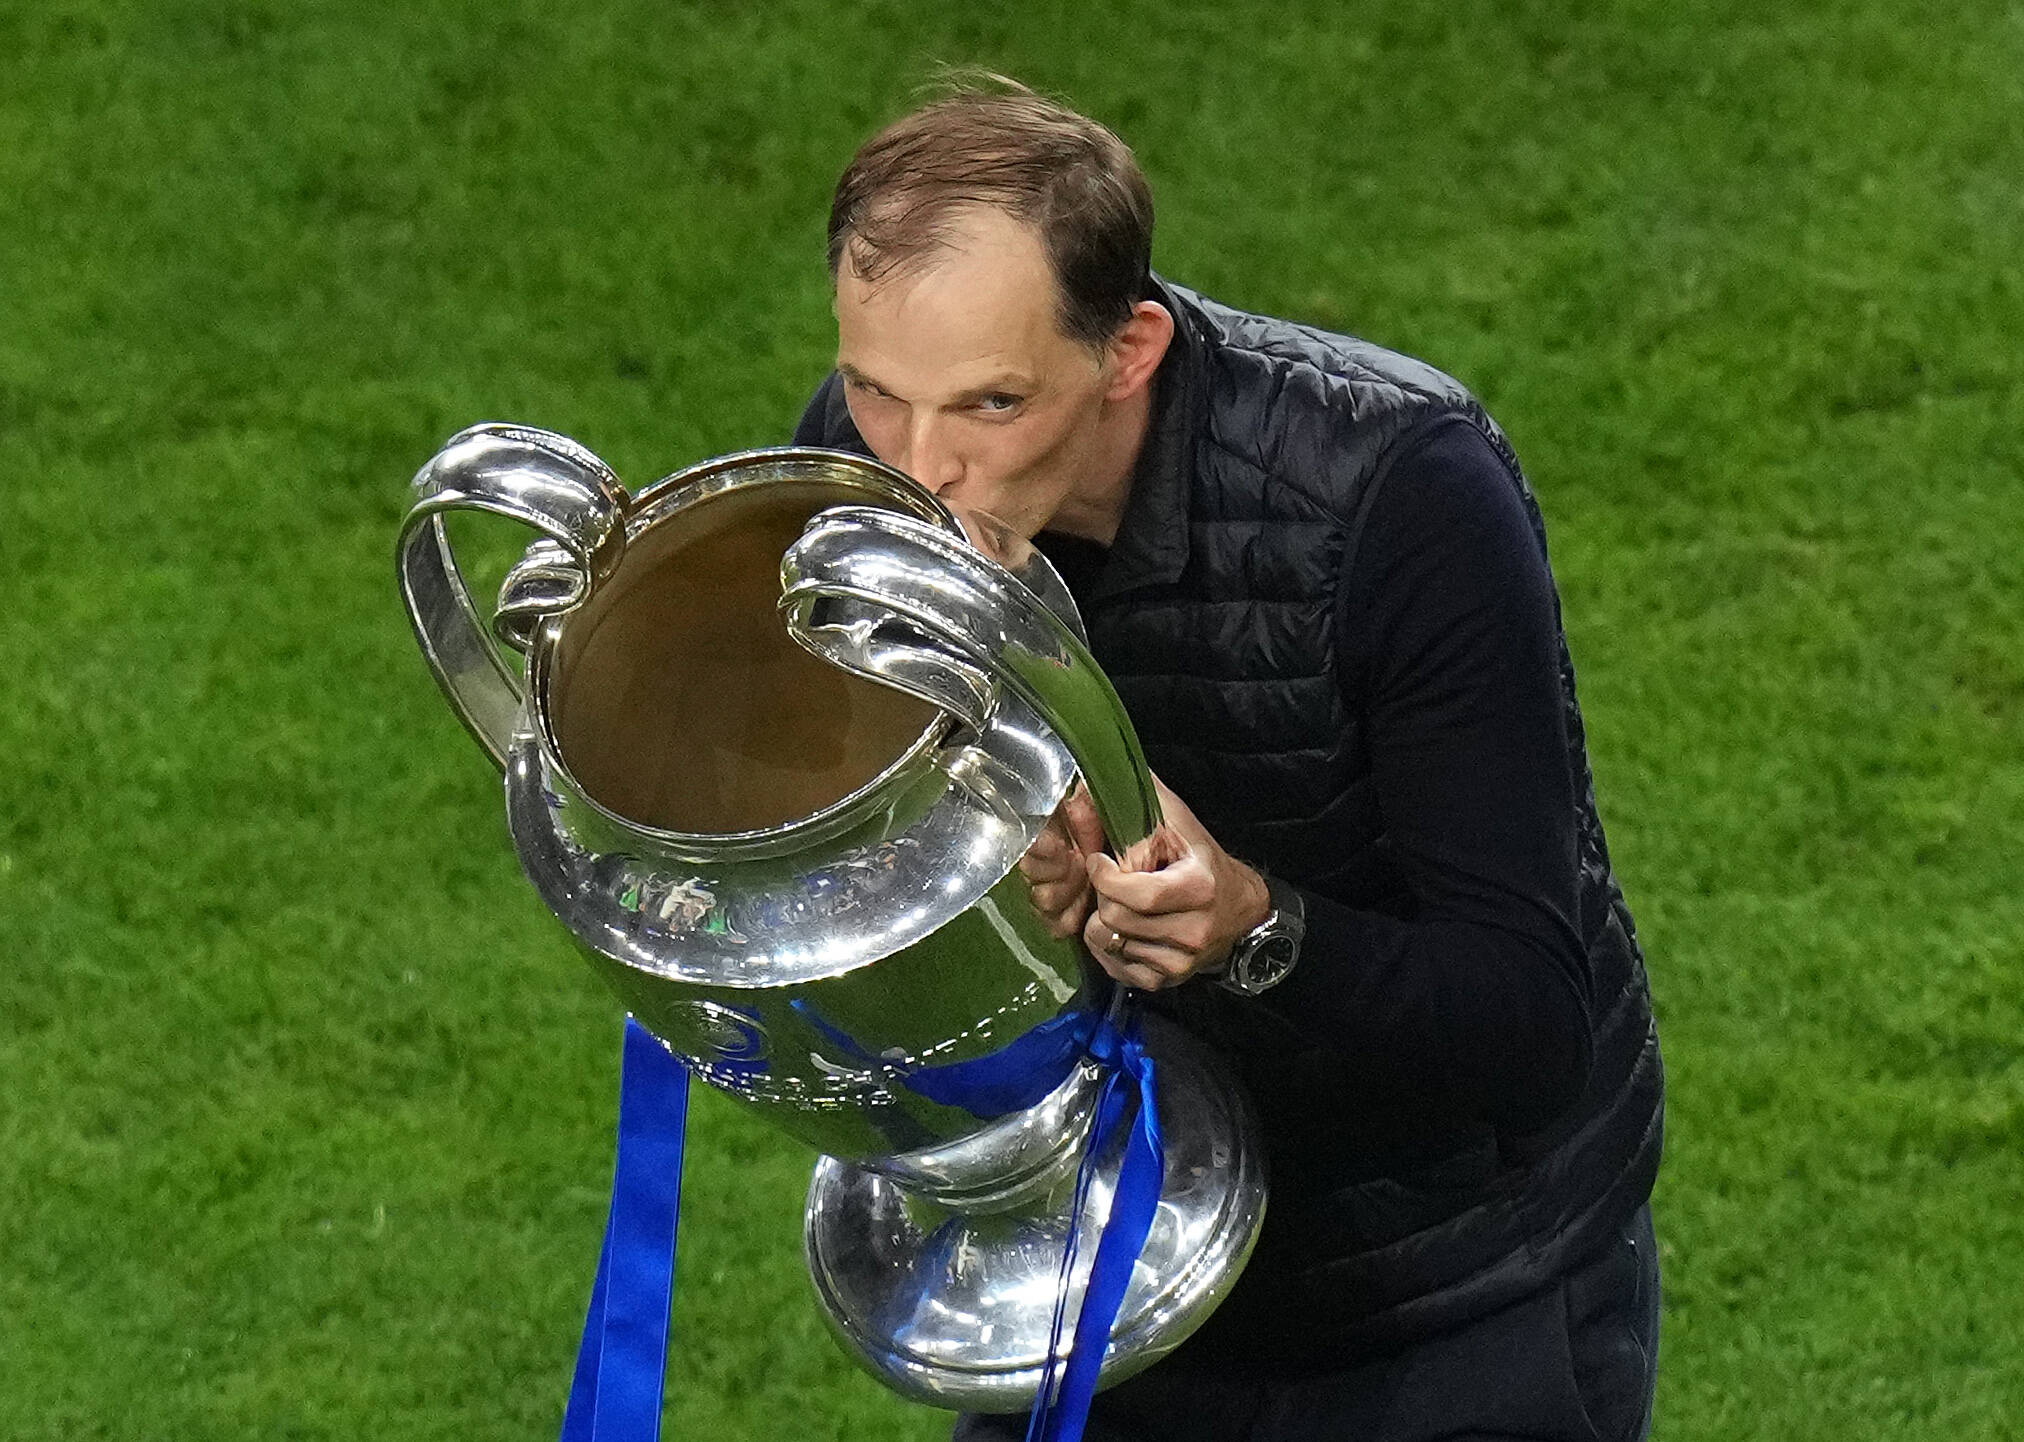 Thomas Tuchel is not a serious contender for the Manchester United job.